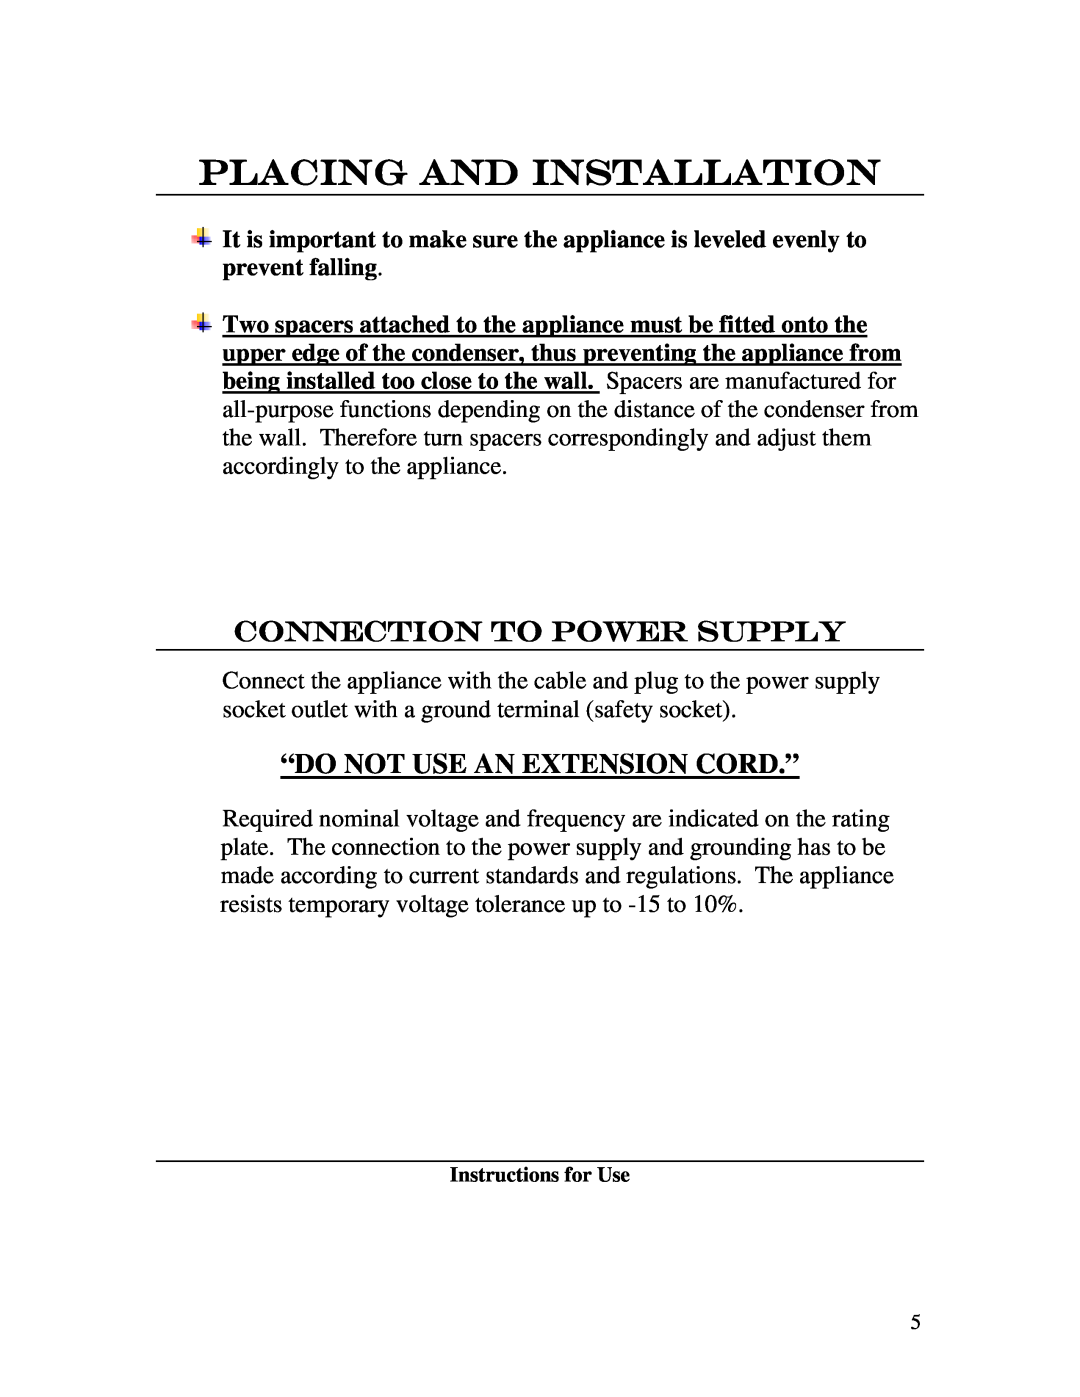 Summit FF-6, FF-7 instruction manual Placing And Installation, Connection to Power Supply, “Do Not Use An Extension Cord.” 